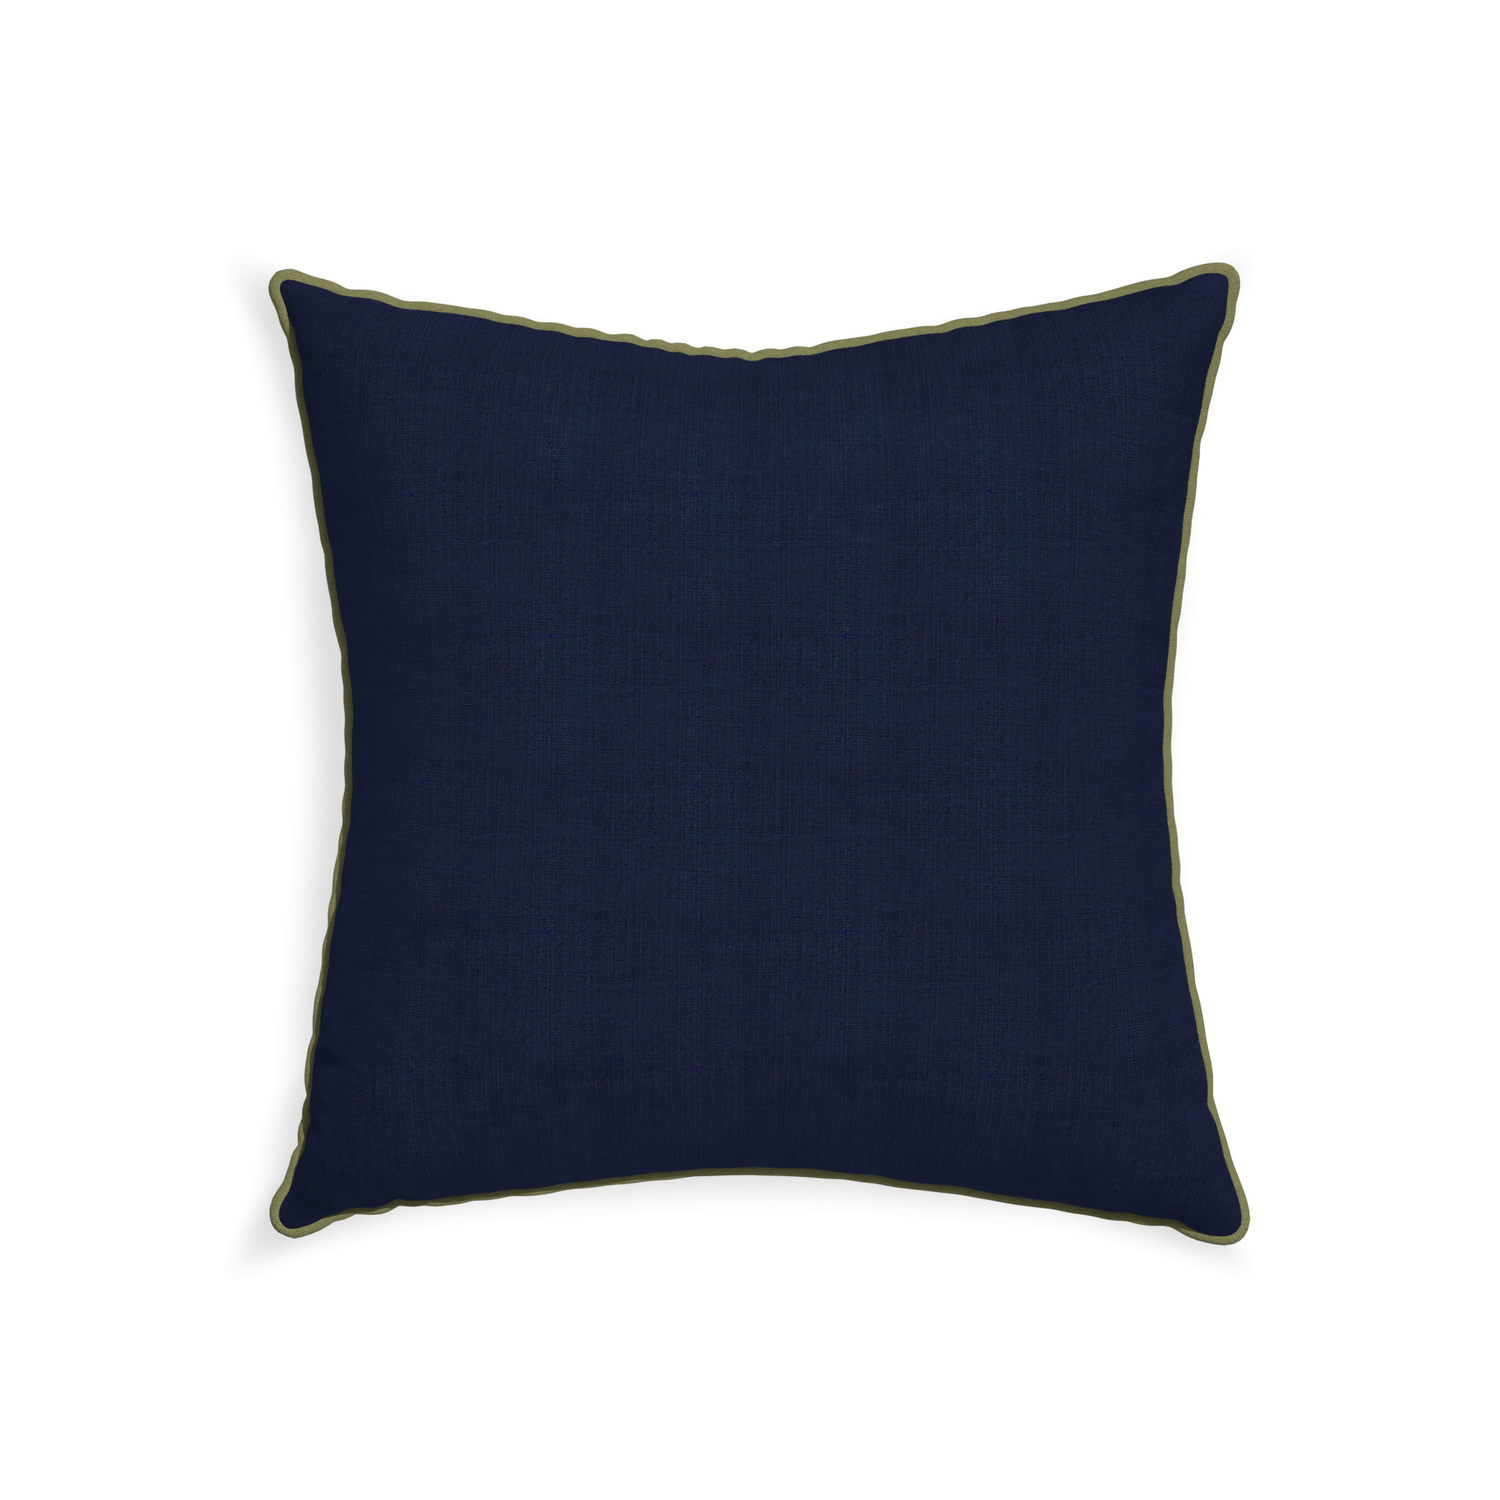 22-square midnight custom pillow with moss piping on white background